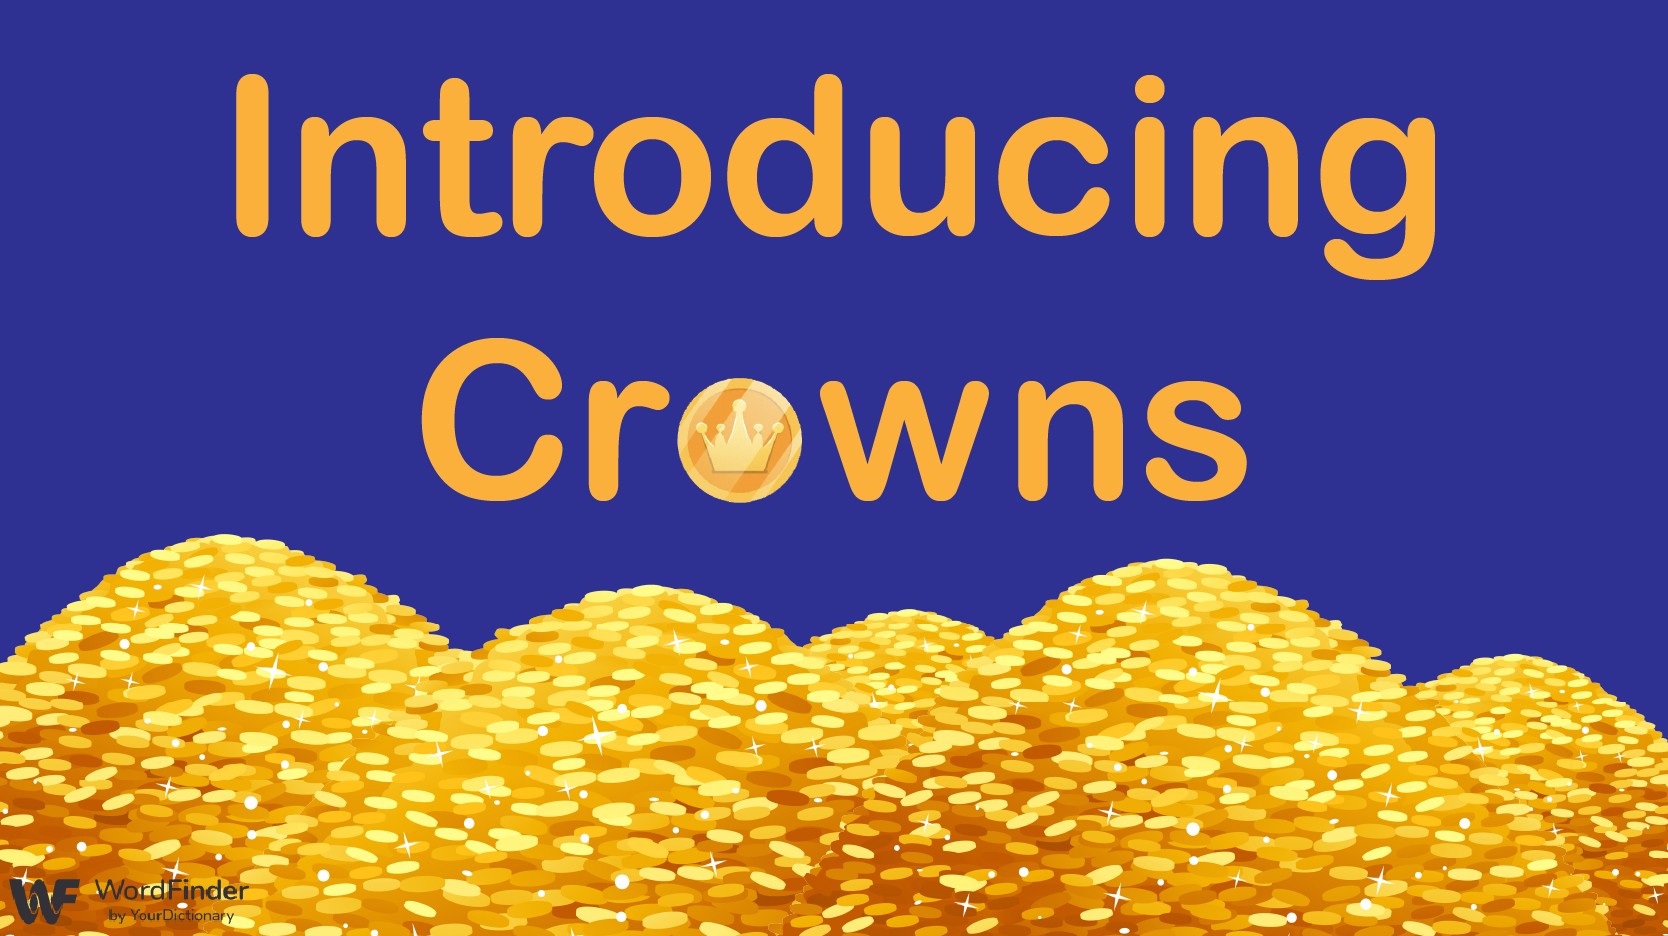 Piles of gold coins introducing Crowns